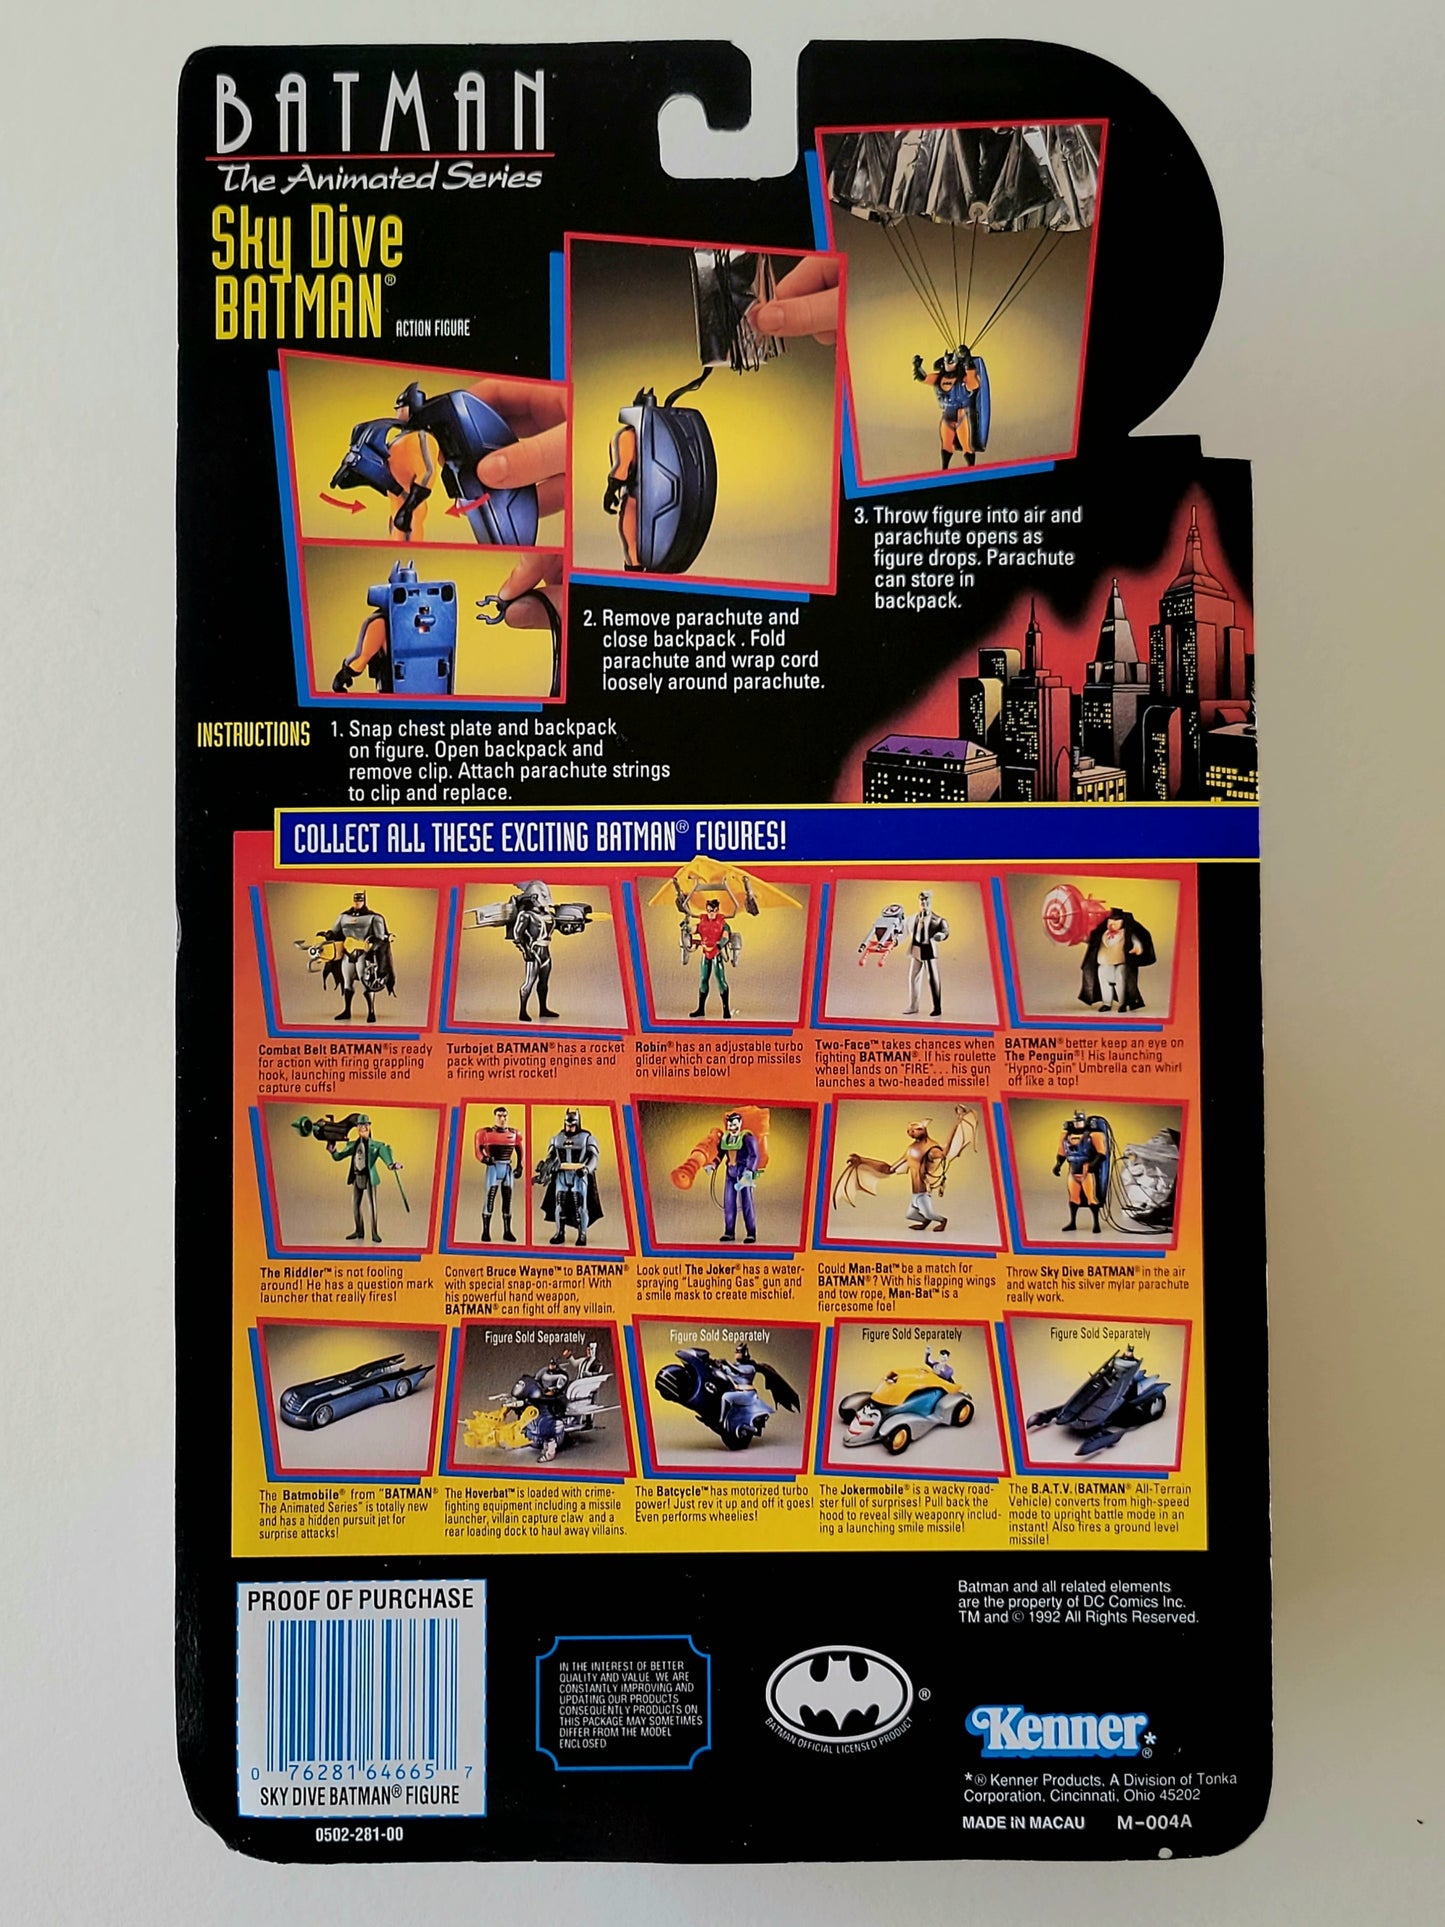 Sky Dive Batman Action Figure from Batman: The Animated Series